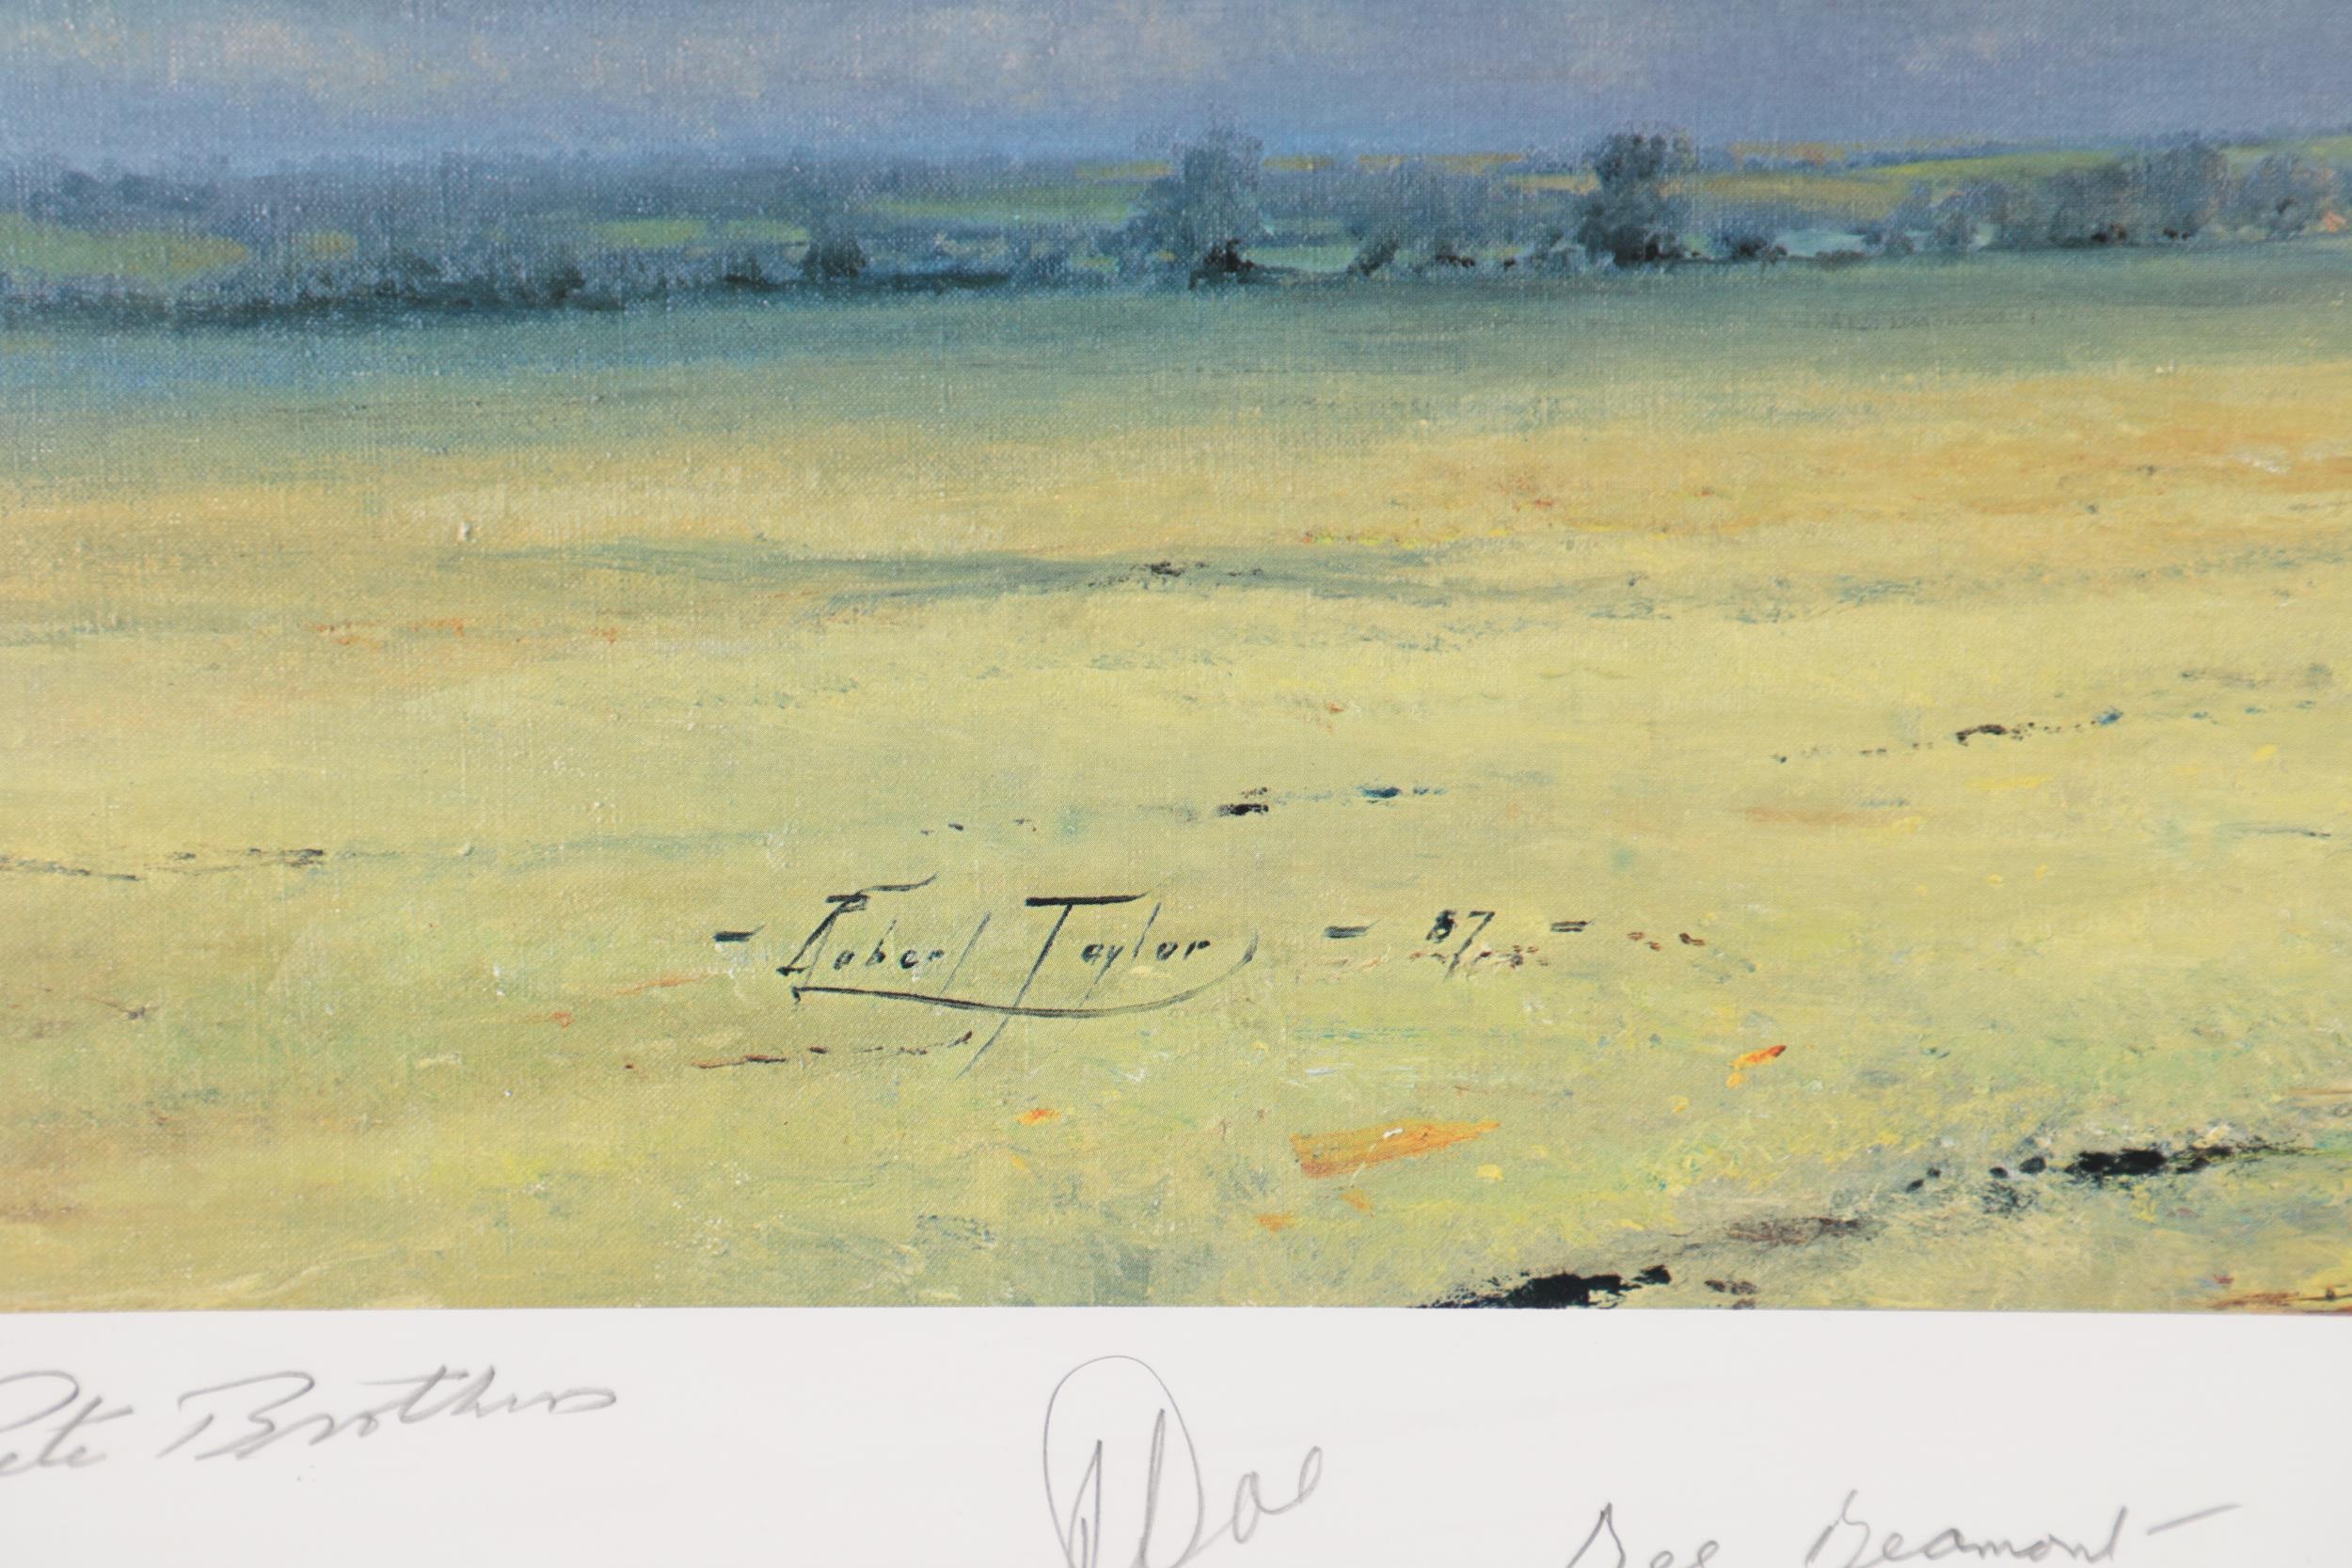 HURRICANE SCRAMBLE BY ROBERT TAYLOR, A COLOUR PRINT WITH PILOT'S SIGNATURES IN THE MARGIN. - Image 3 of 9